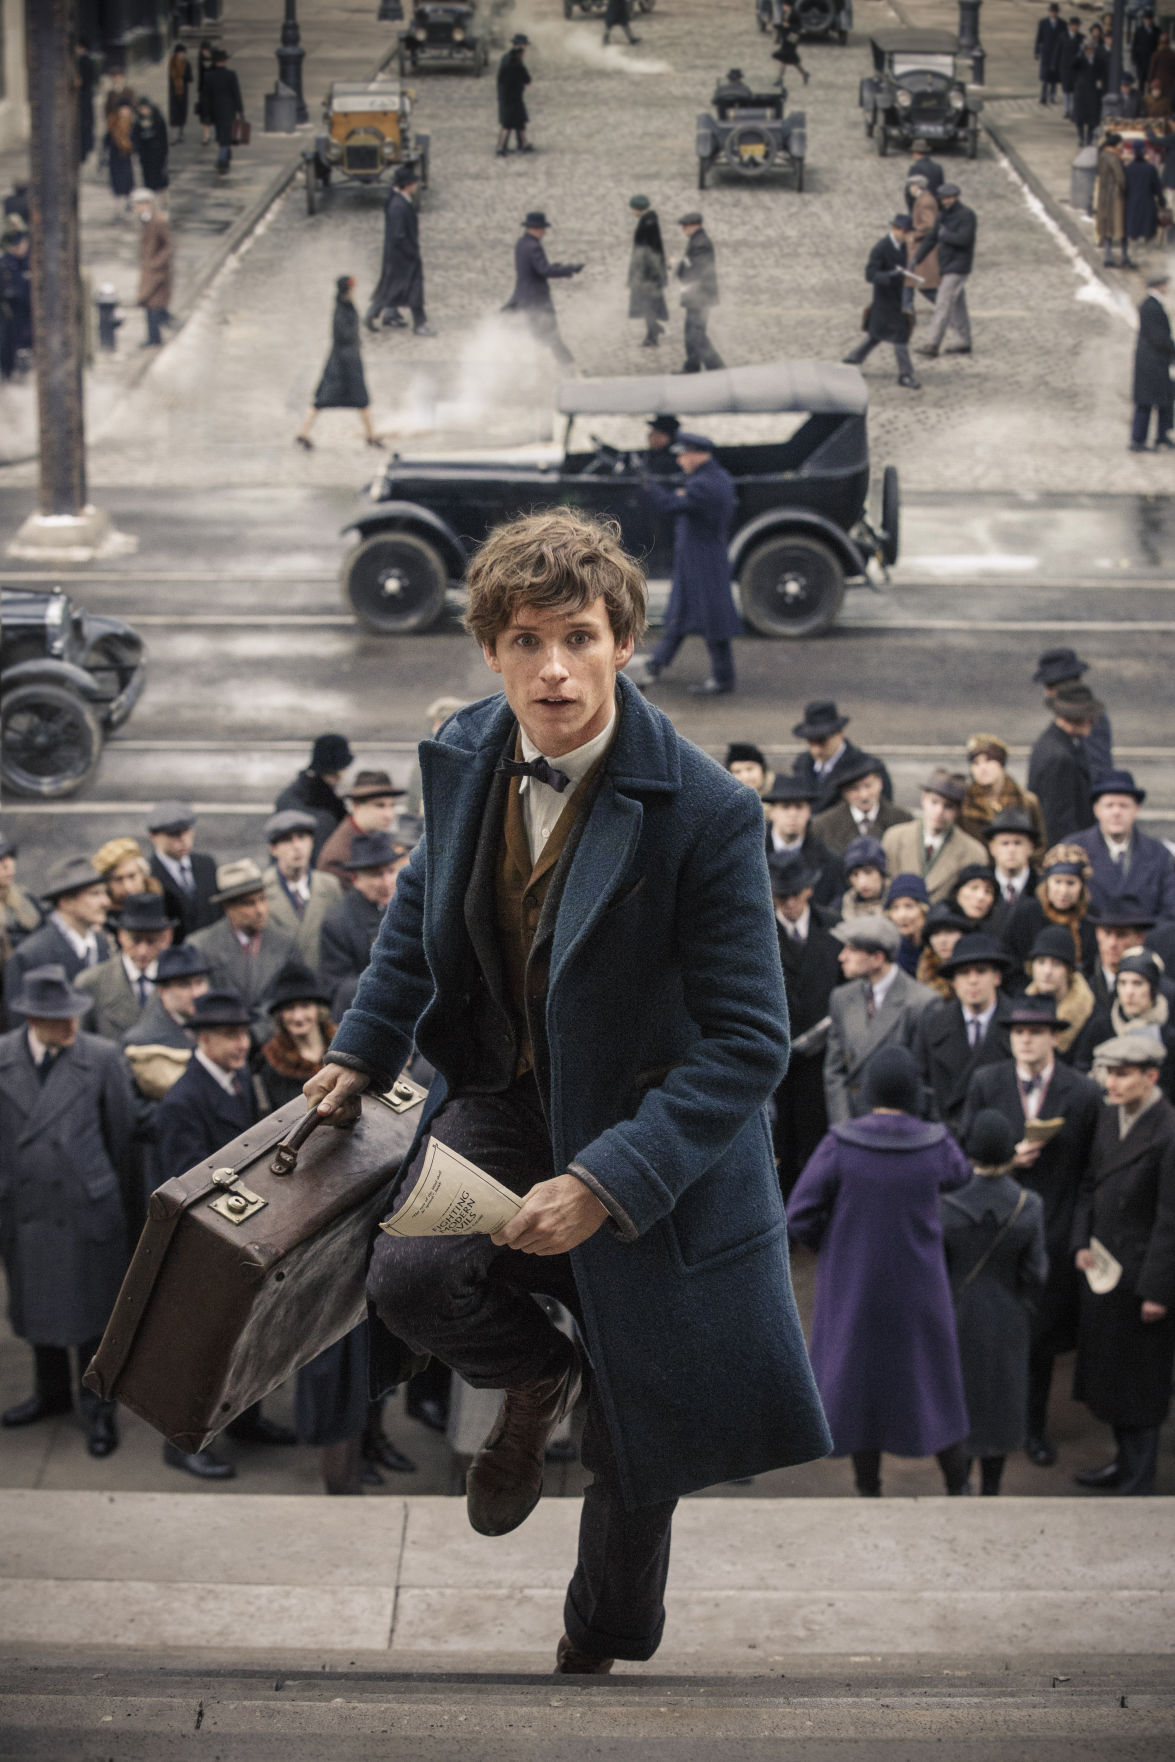 Fantastic Beasts And Where To Find Them Watch 2016 Film Full HD